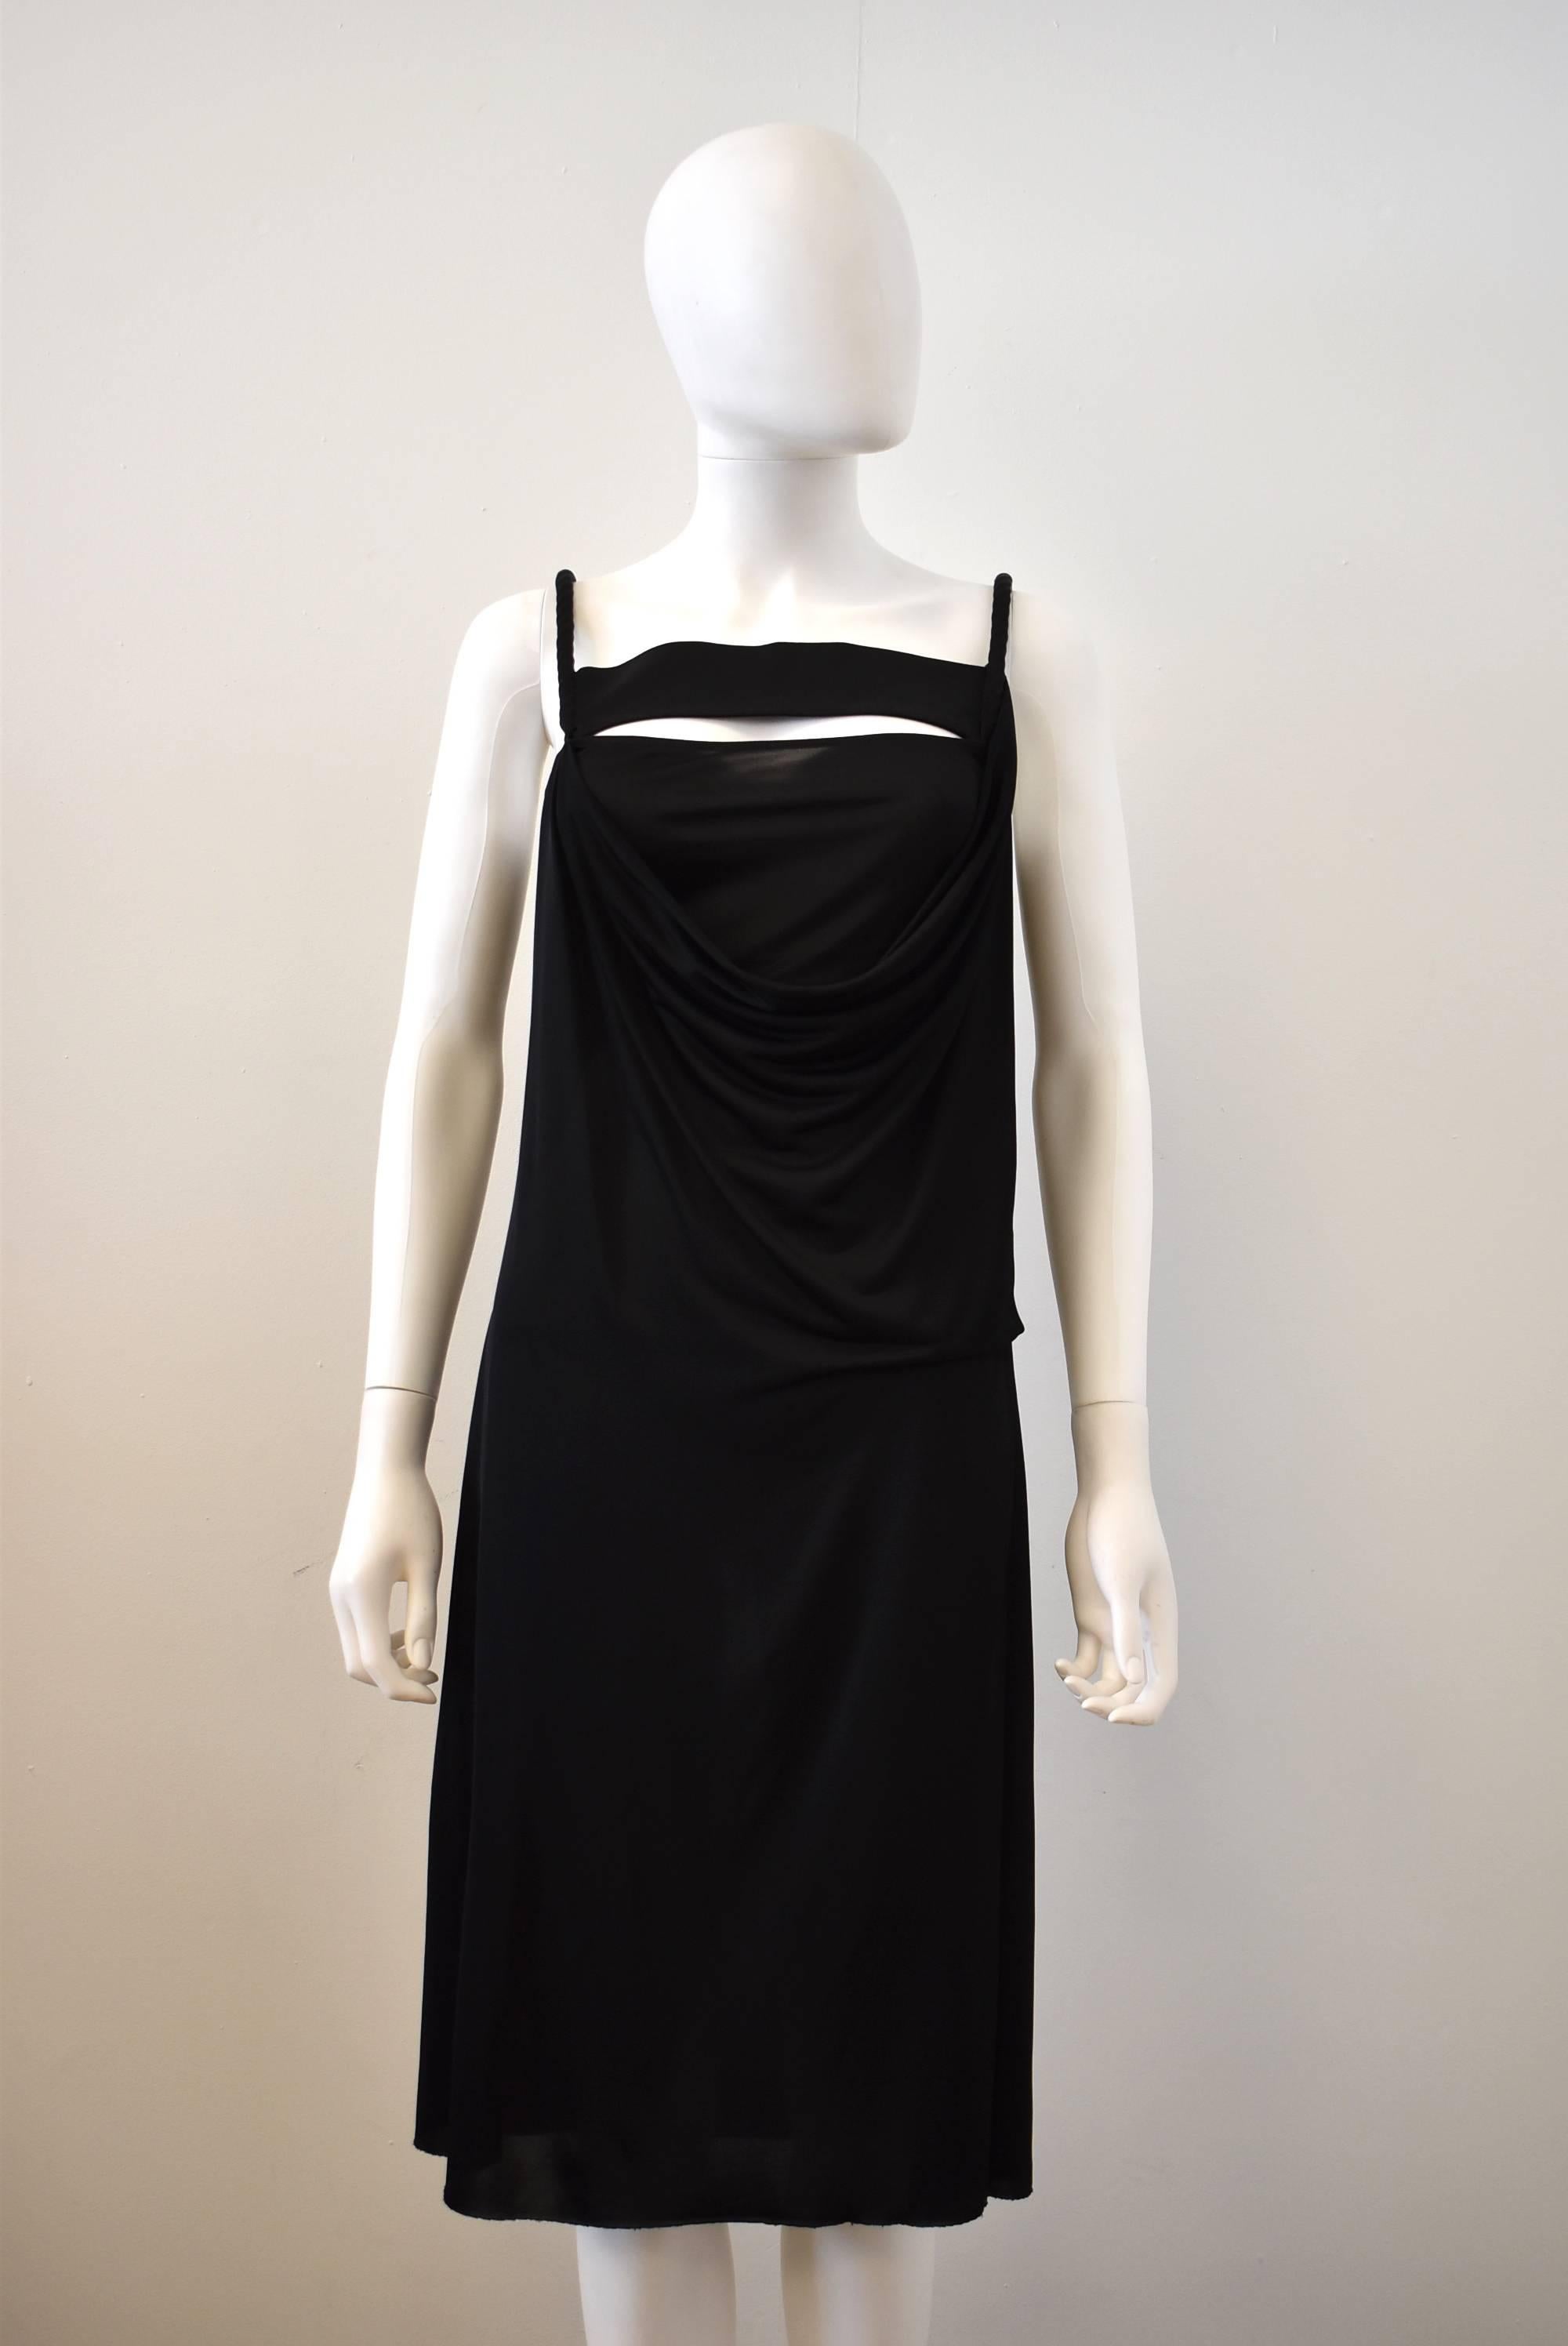 A beautiful Givenchy dress constructed from a bandeau bralet with rope shoulder straps and a draped cowl front and back. The dress subtly clings to the body and drapes to give the dress shape and movement. The dress is a size XS and is made from a